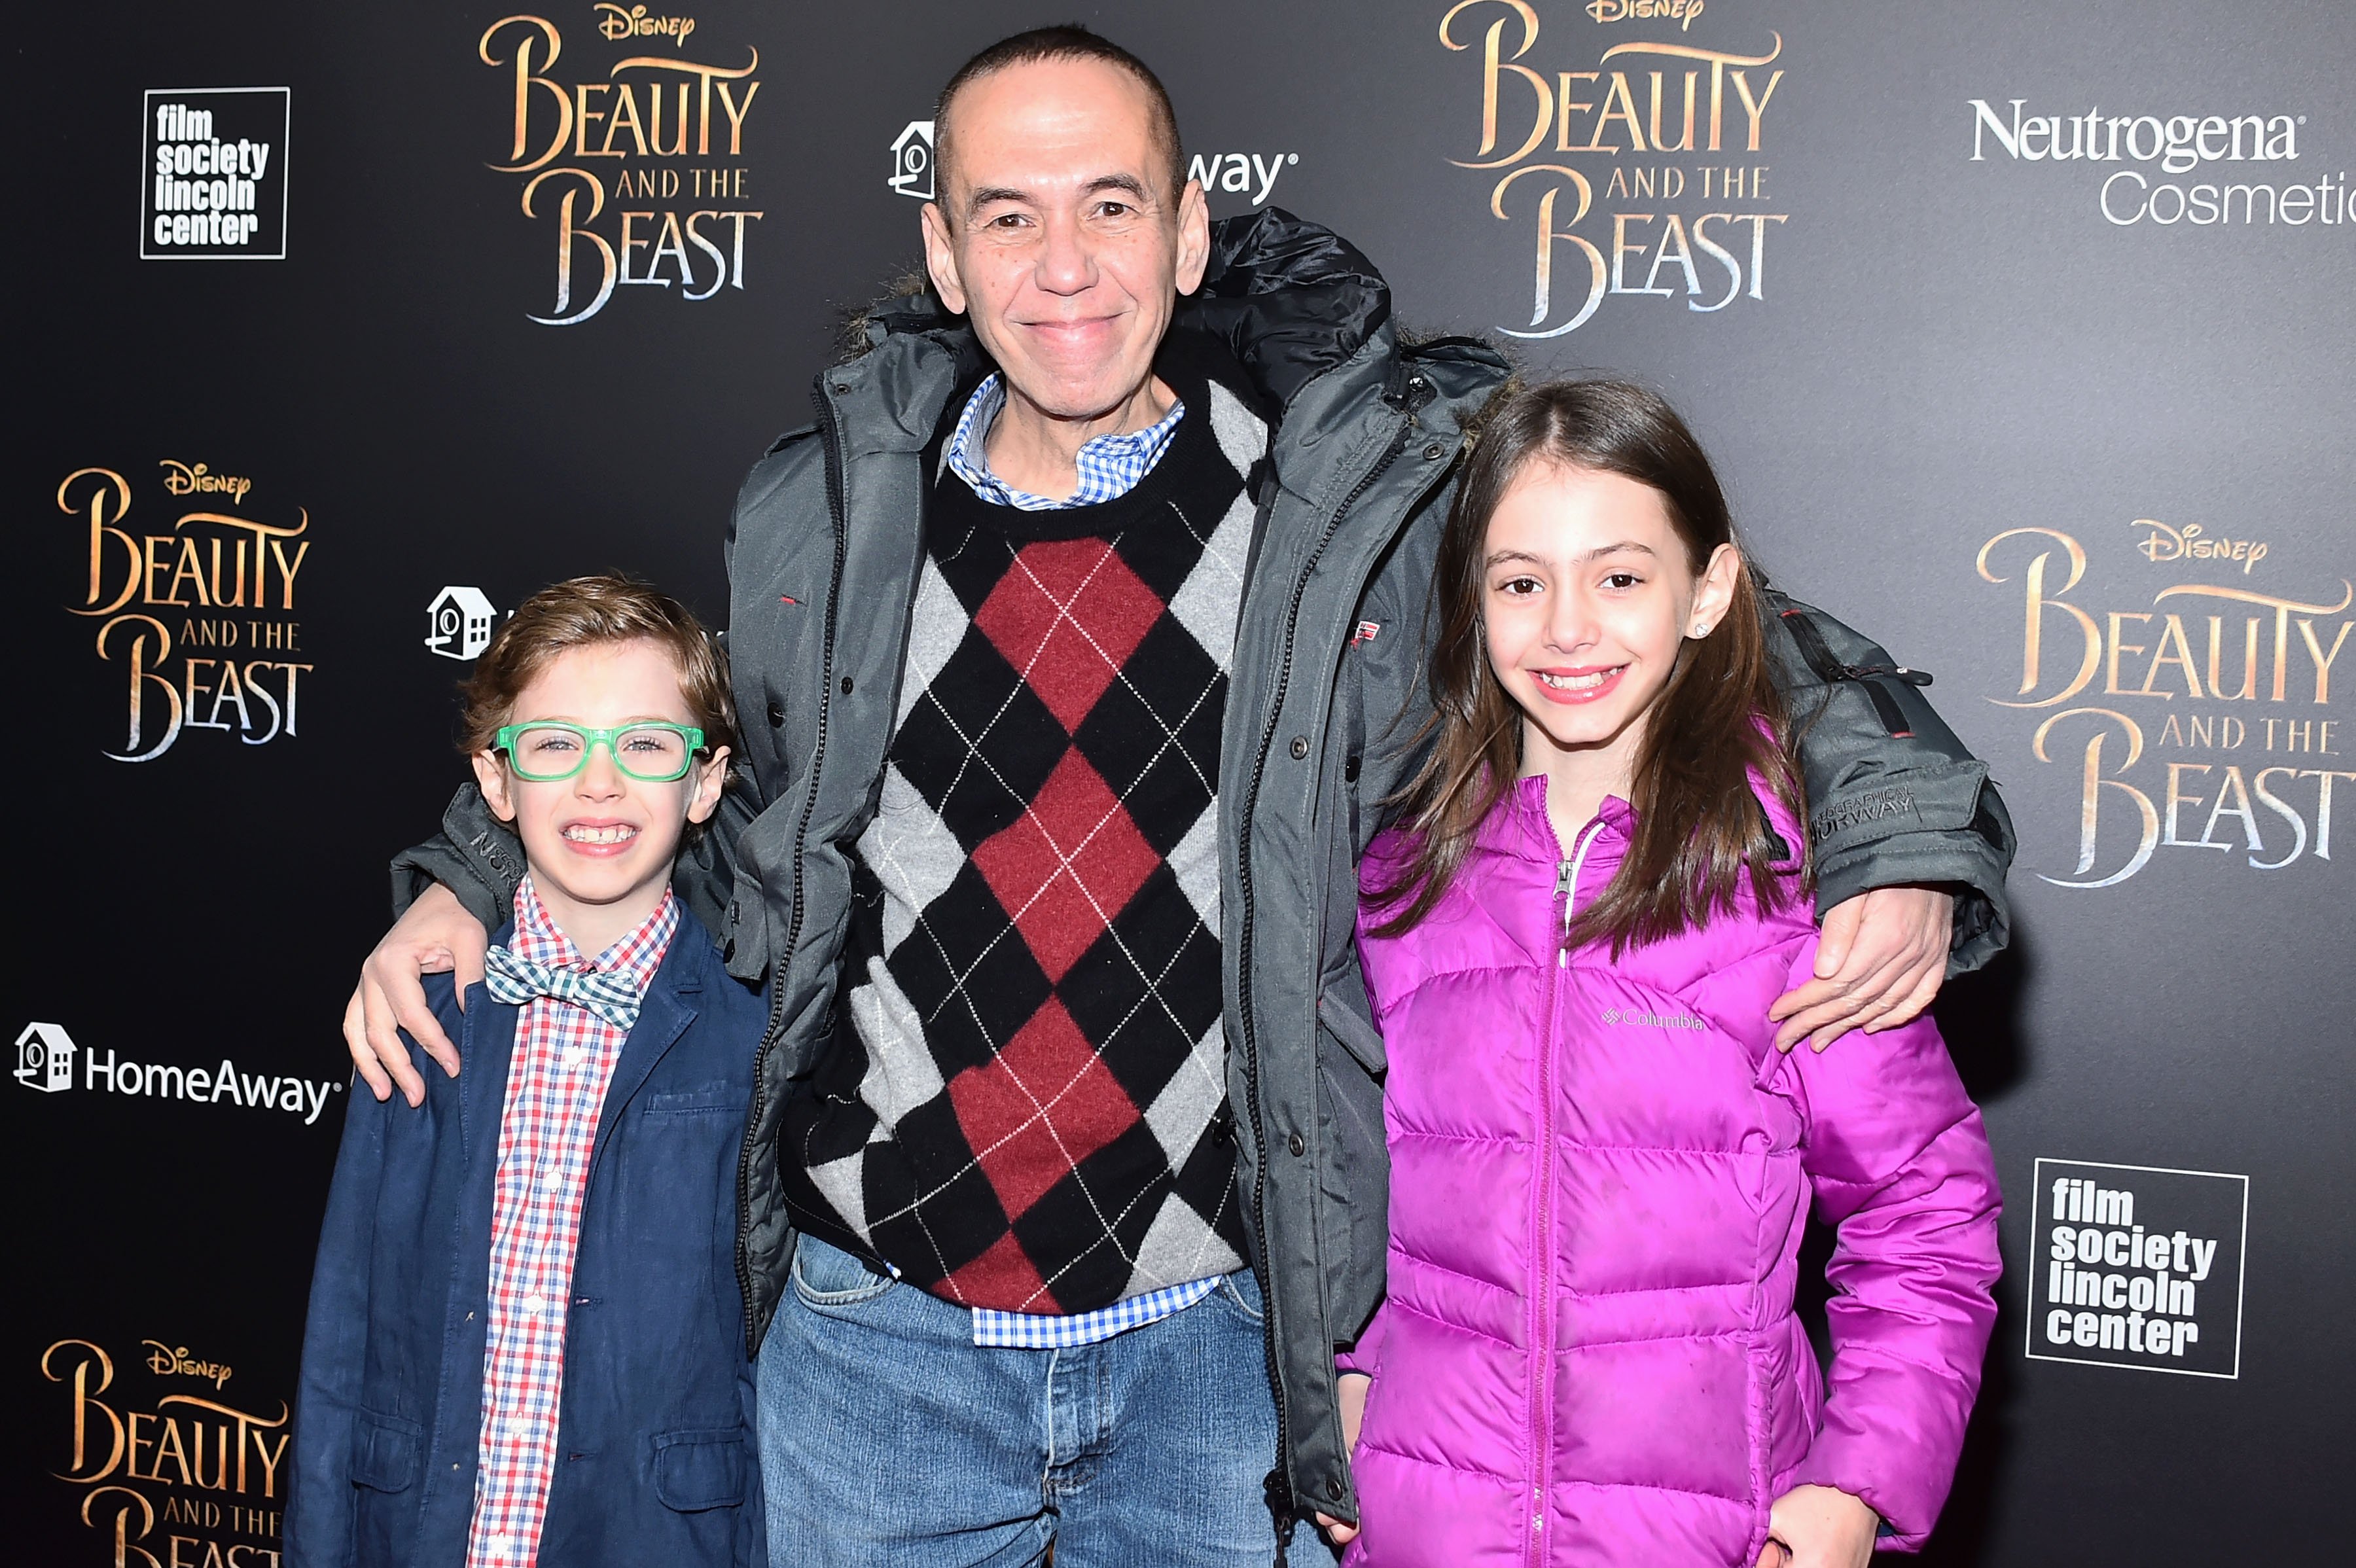 Max Aaron Gottfried, Gilbert Gottfried and Lily Aster Gottfried at the New York screening of "Beauty And The Beast" in 2017 in New York City.  | Source: Getty Images